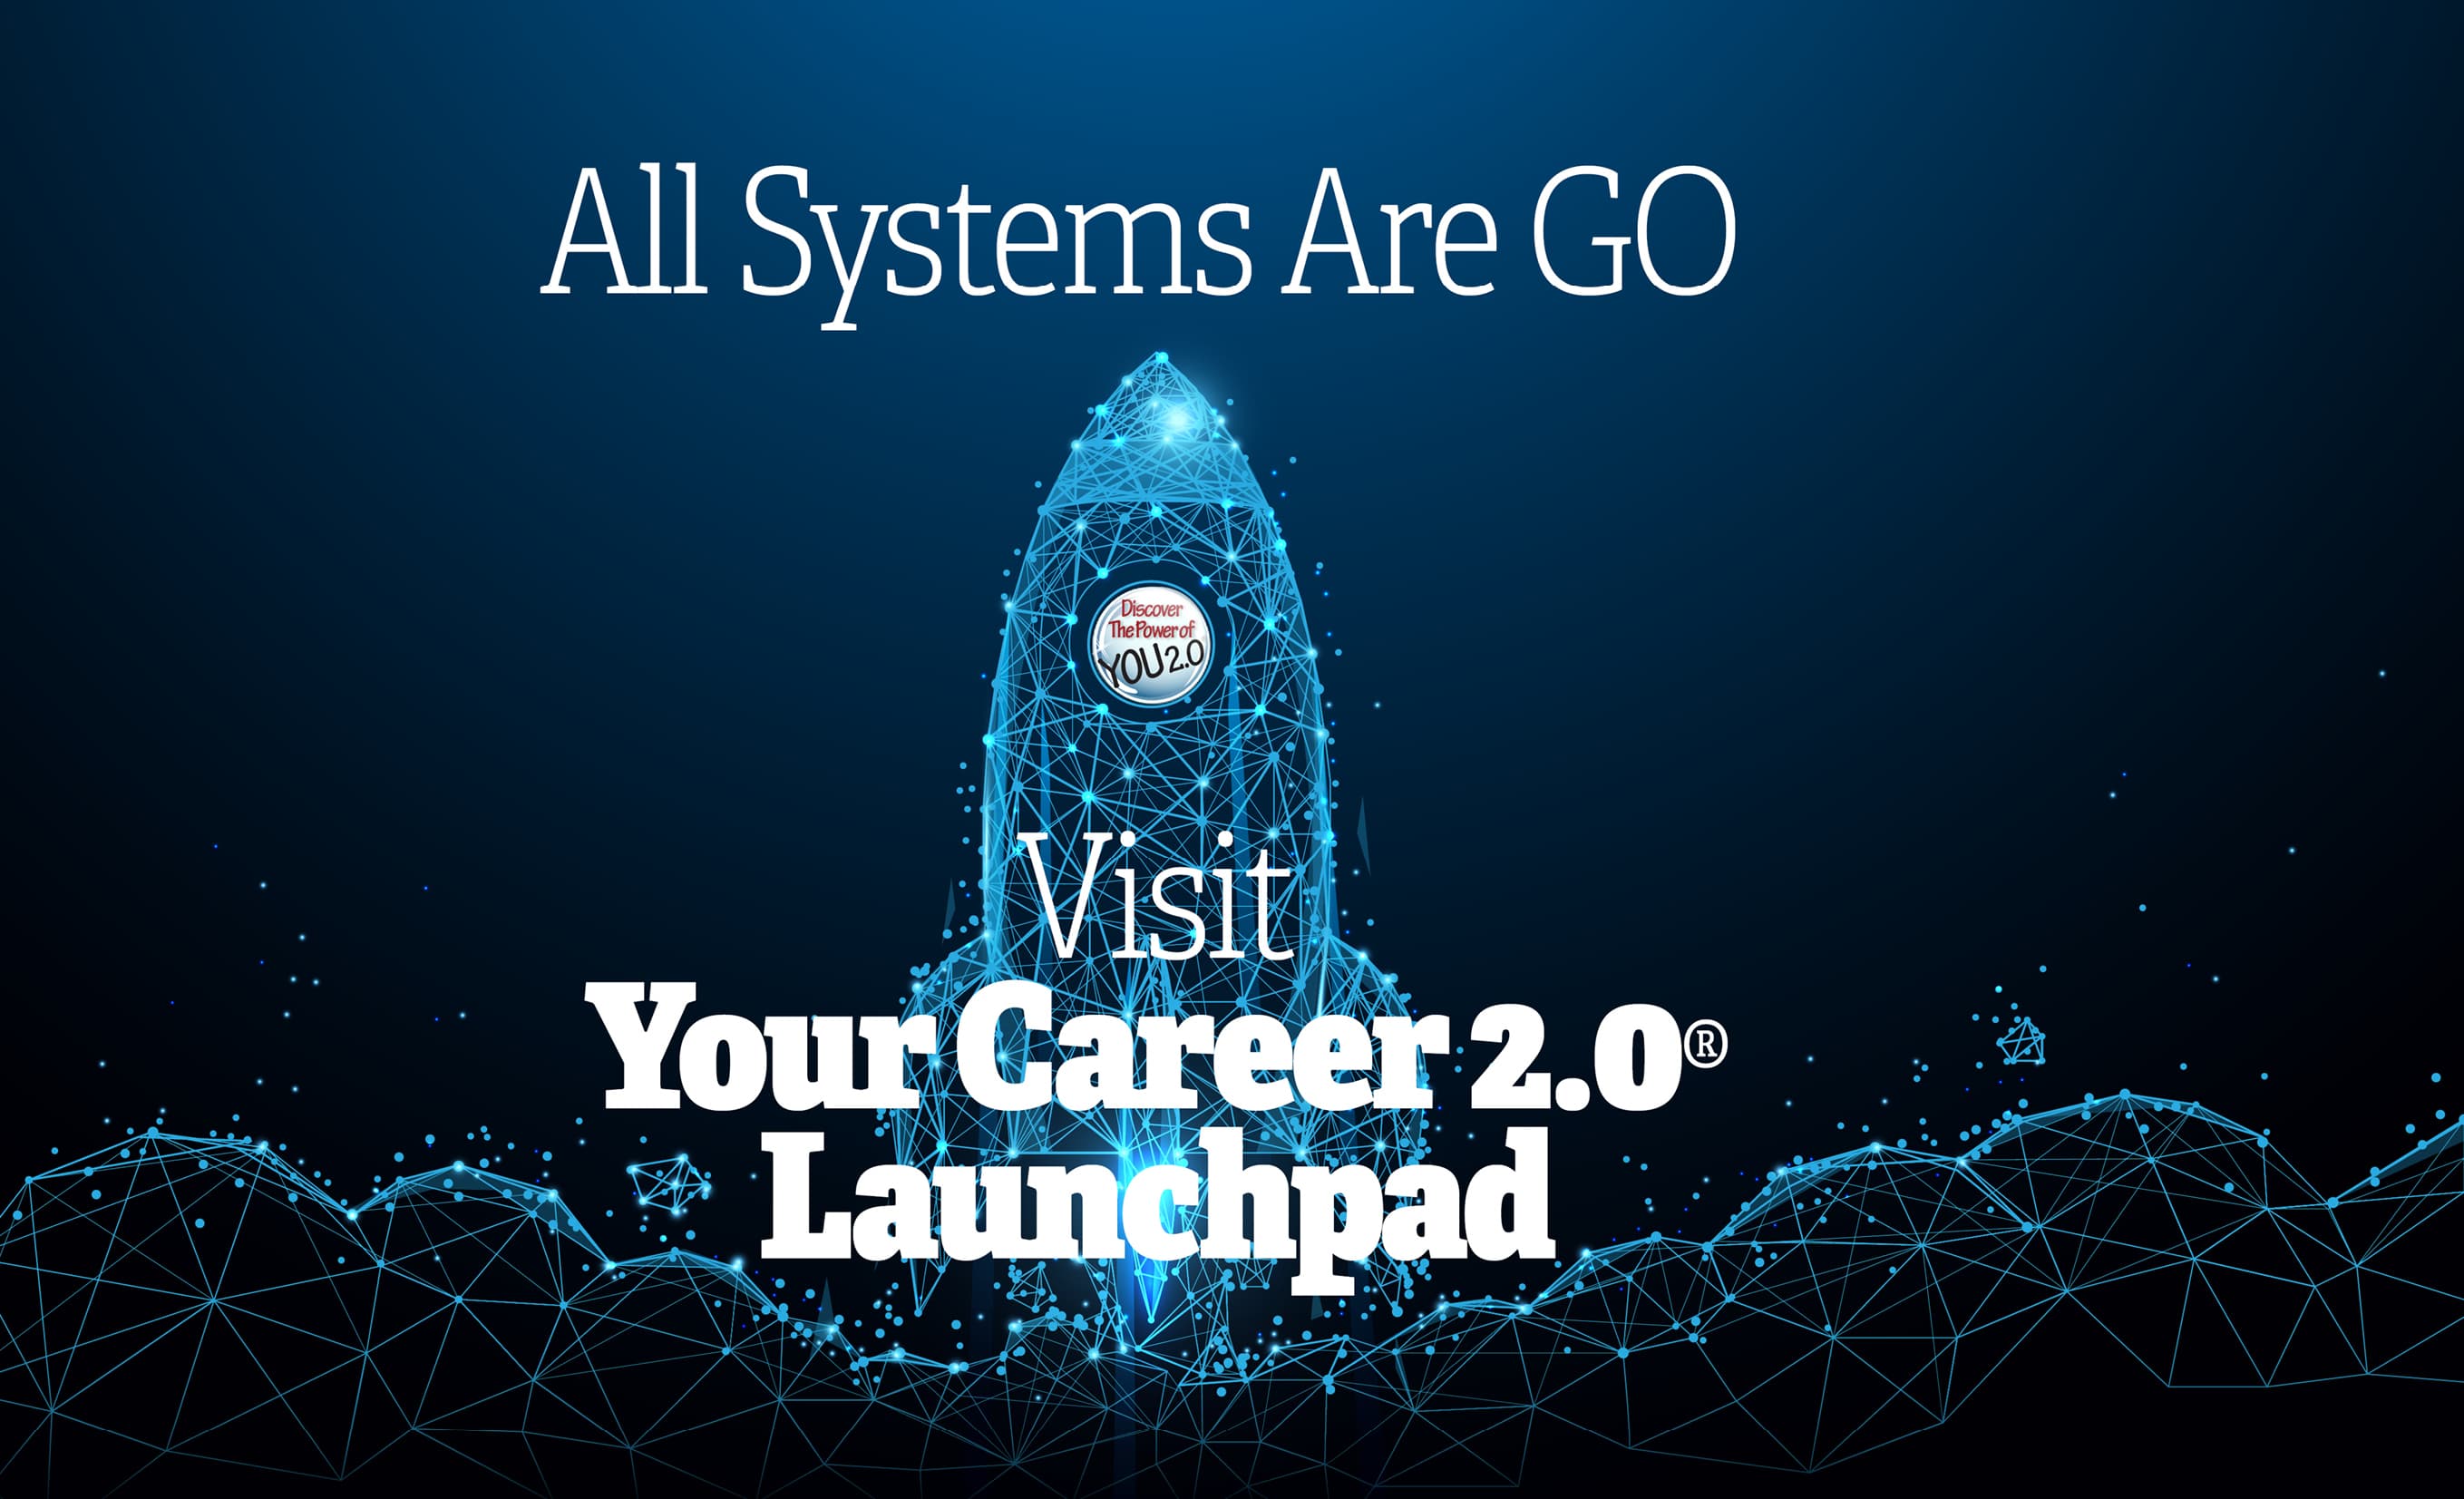 graphic of blue rocket with All Systems are Go, Visit Your Career 2.0 Launchpad text